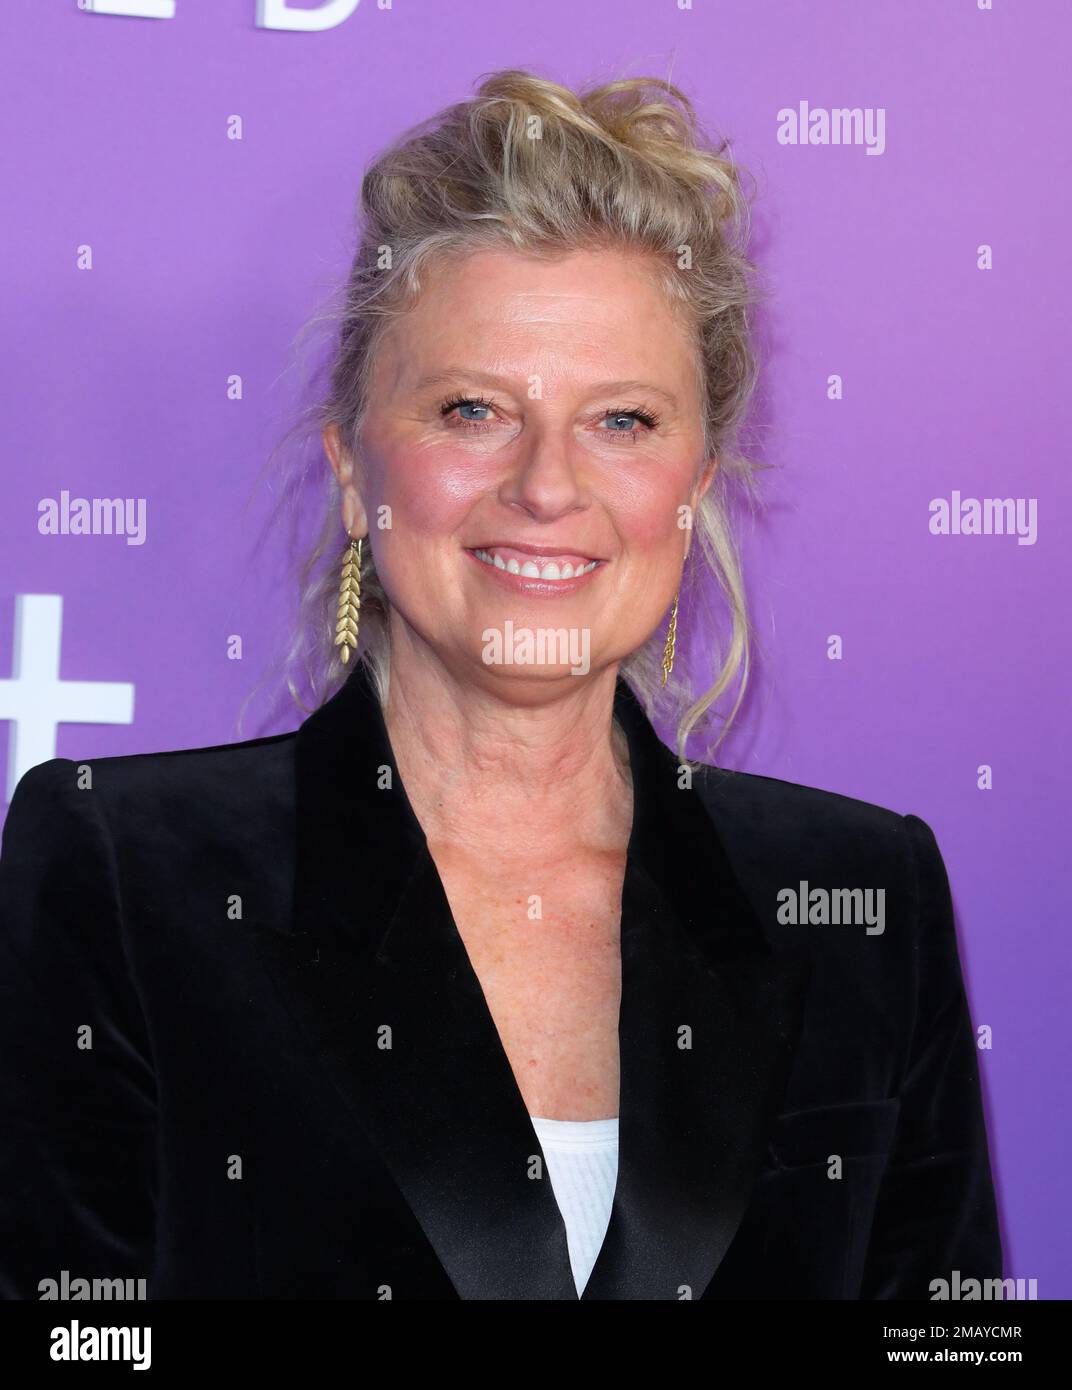 Los Angeles, USA. 19th Jan, 2023. Jenno Topping arrives at The Red Carpet Event for the season three premiere of Apple Original Drama Series Truth Be Told held at The Pacific Design Center in Los Angeles, CA on Thursday, January 19, 2023 . (Photo By Juan Pablo Rico/Sipa USA) Credit: Sipa USA/Alamy Live News Stock Photo